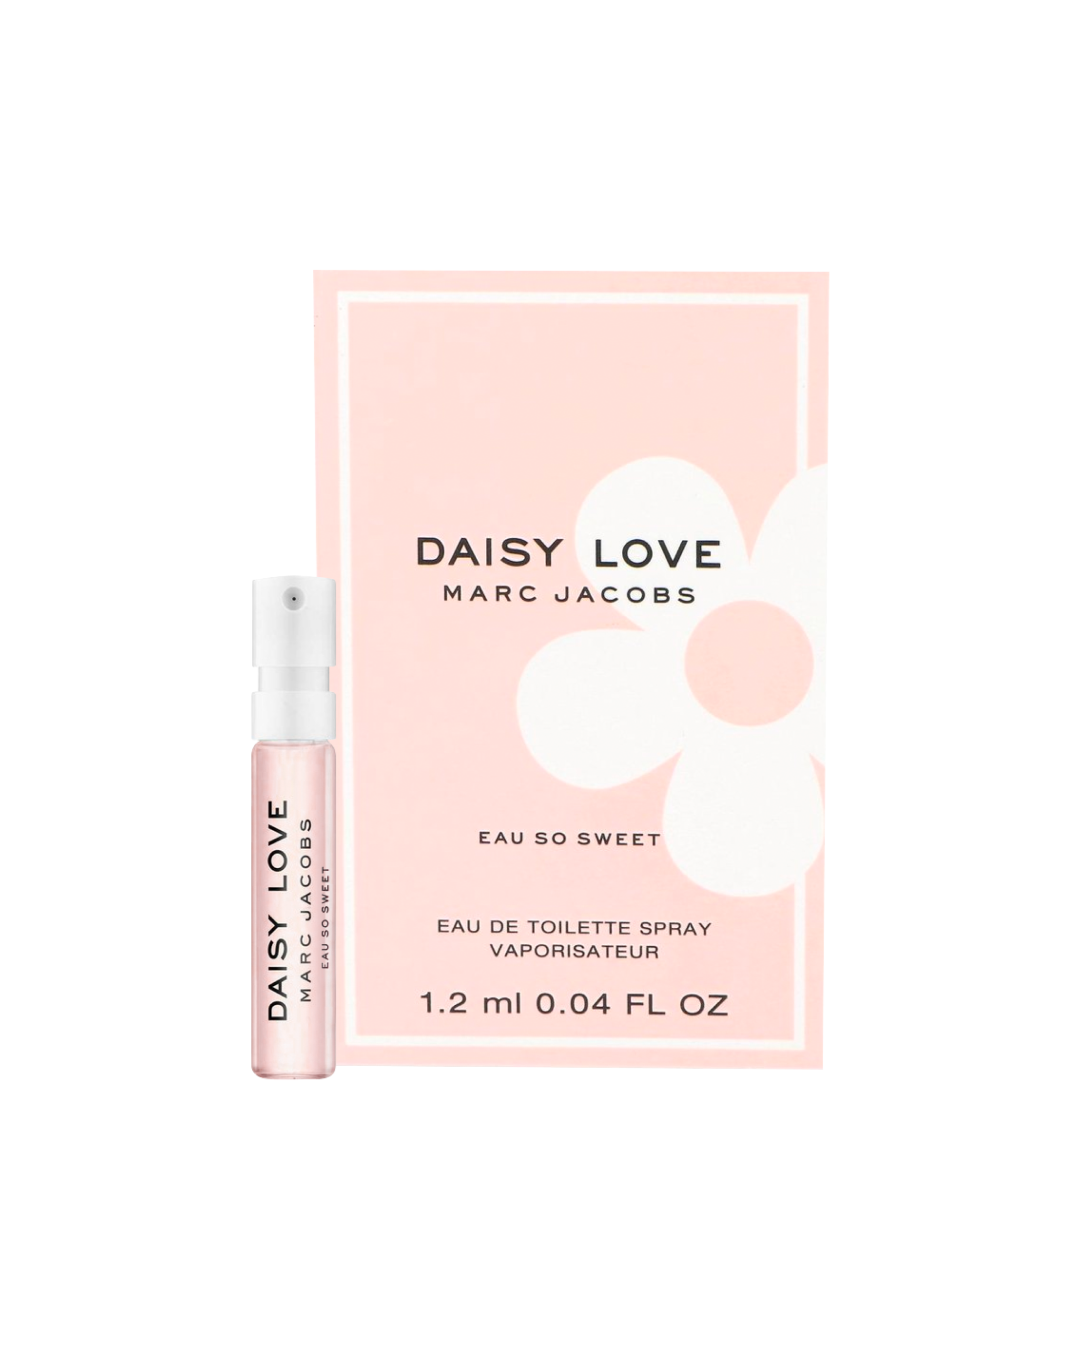 Marc Jacobs Daisy Love Eau So Sweet EDT Travel Vial (1.2ml) - Best Buy World Philippines